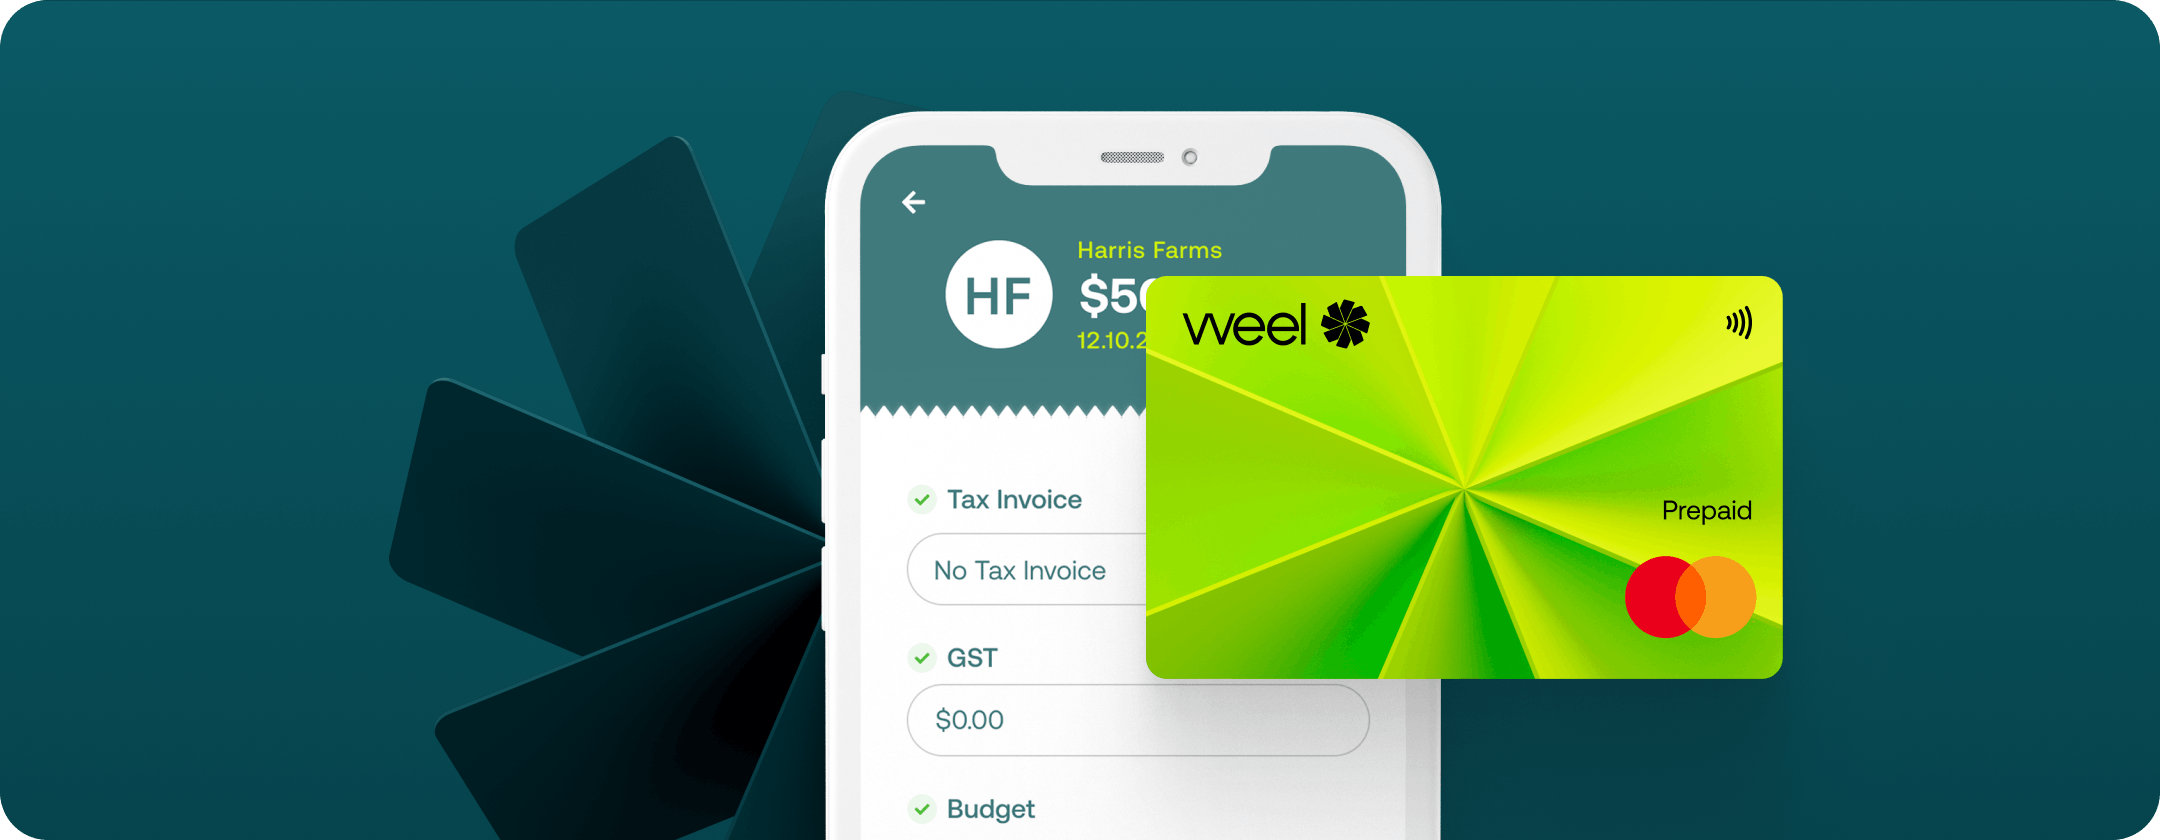 Weel app and card